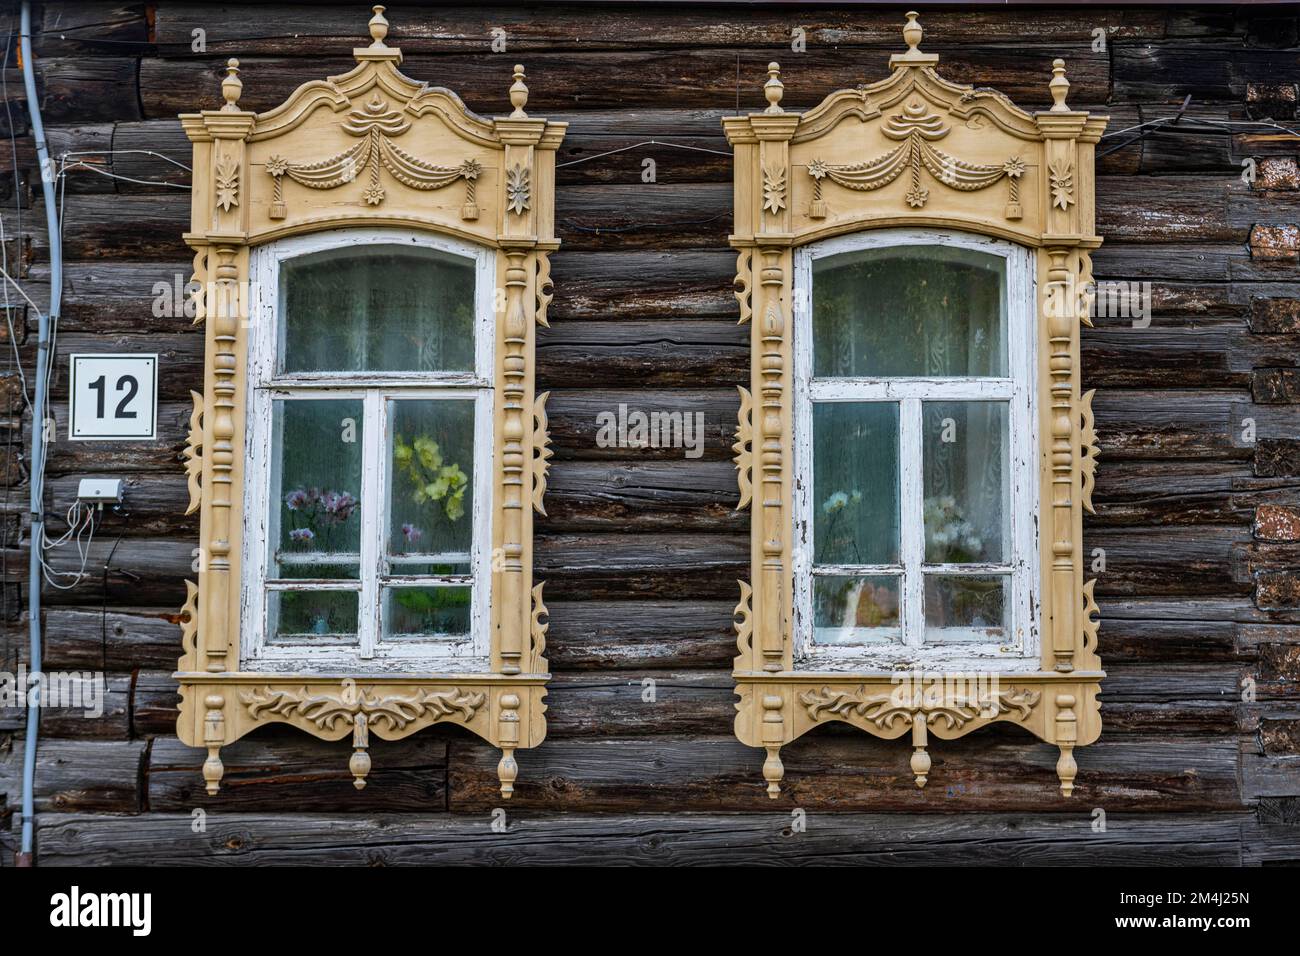 Detail woodwork, Old wooden house, Tomsk, Tomsk Oblast, Russia Stock Photo